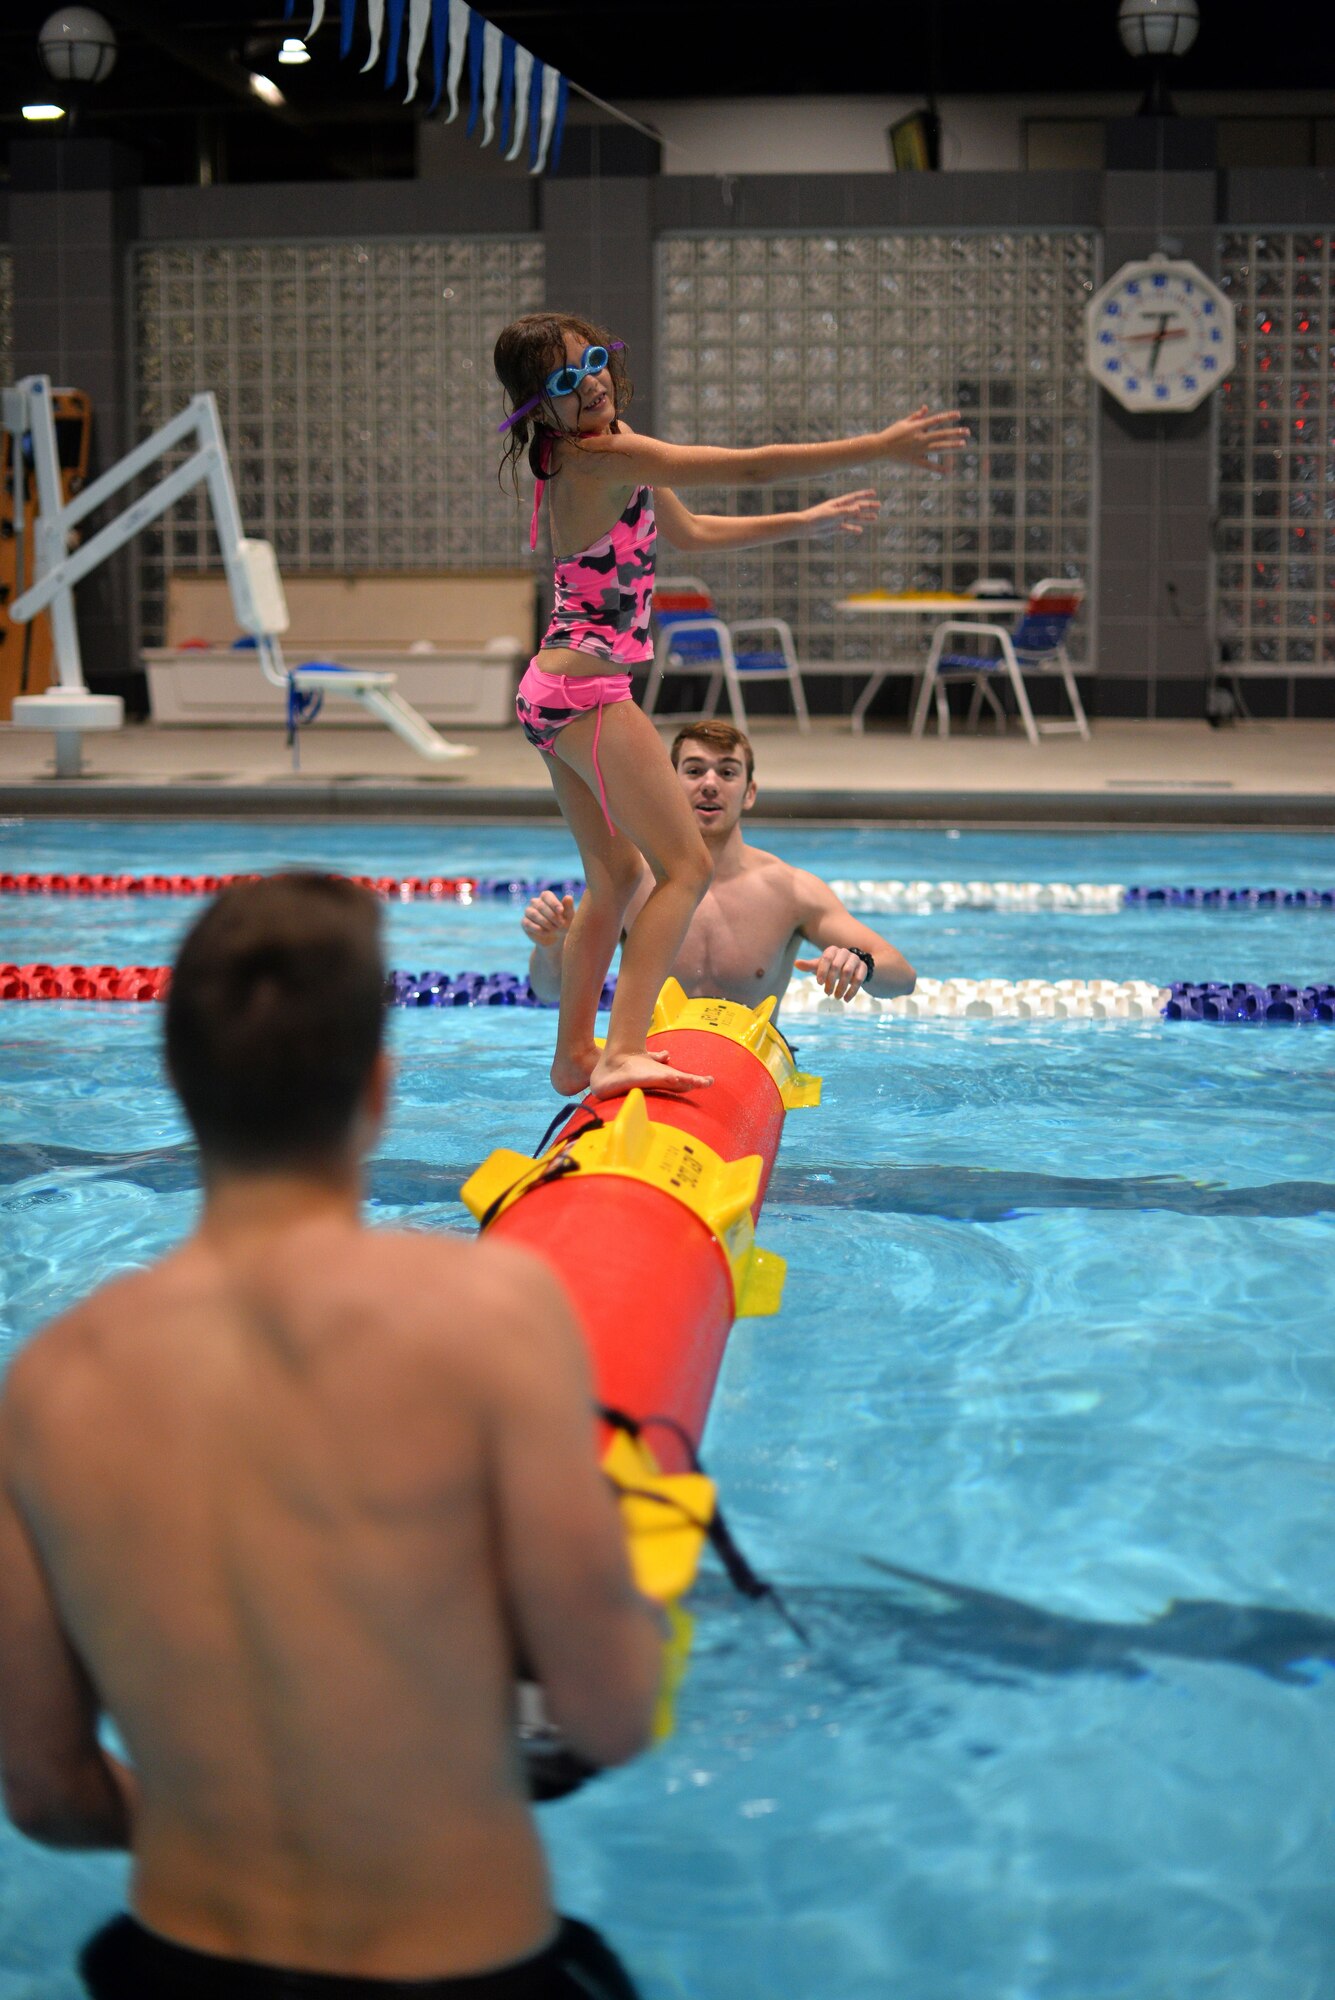 Trinity Hopwood attempts to maintain balance on a synthetic log with the assistance of two lifeguards at the base pool located inside the Offutt Field House on Jan. 13, 2018.